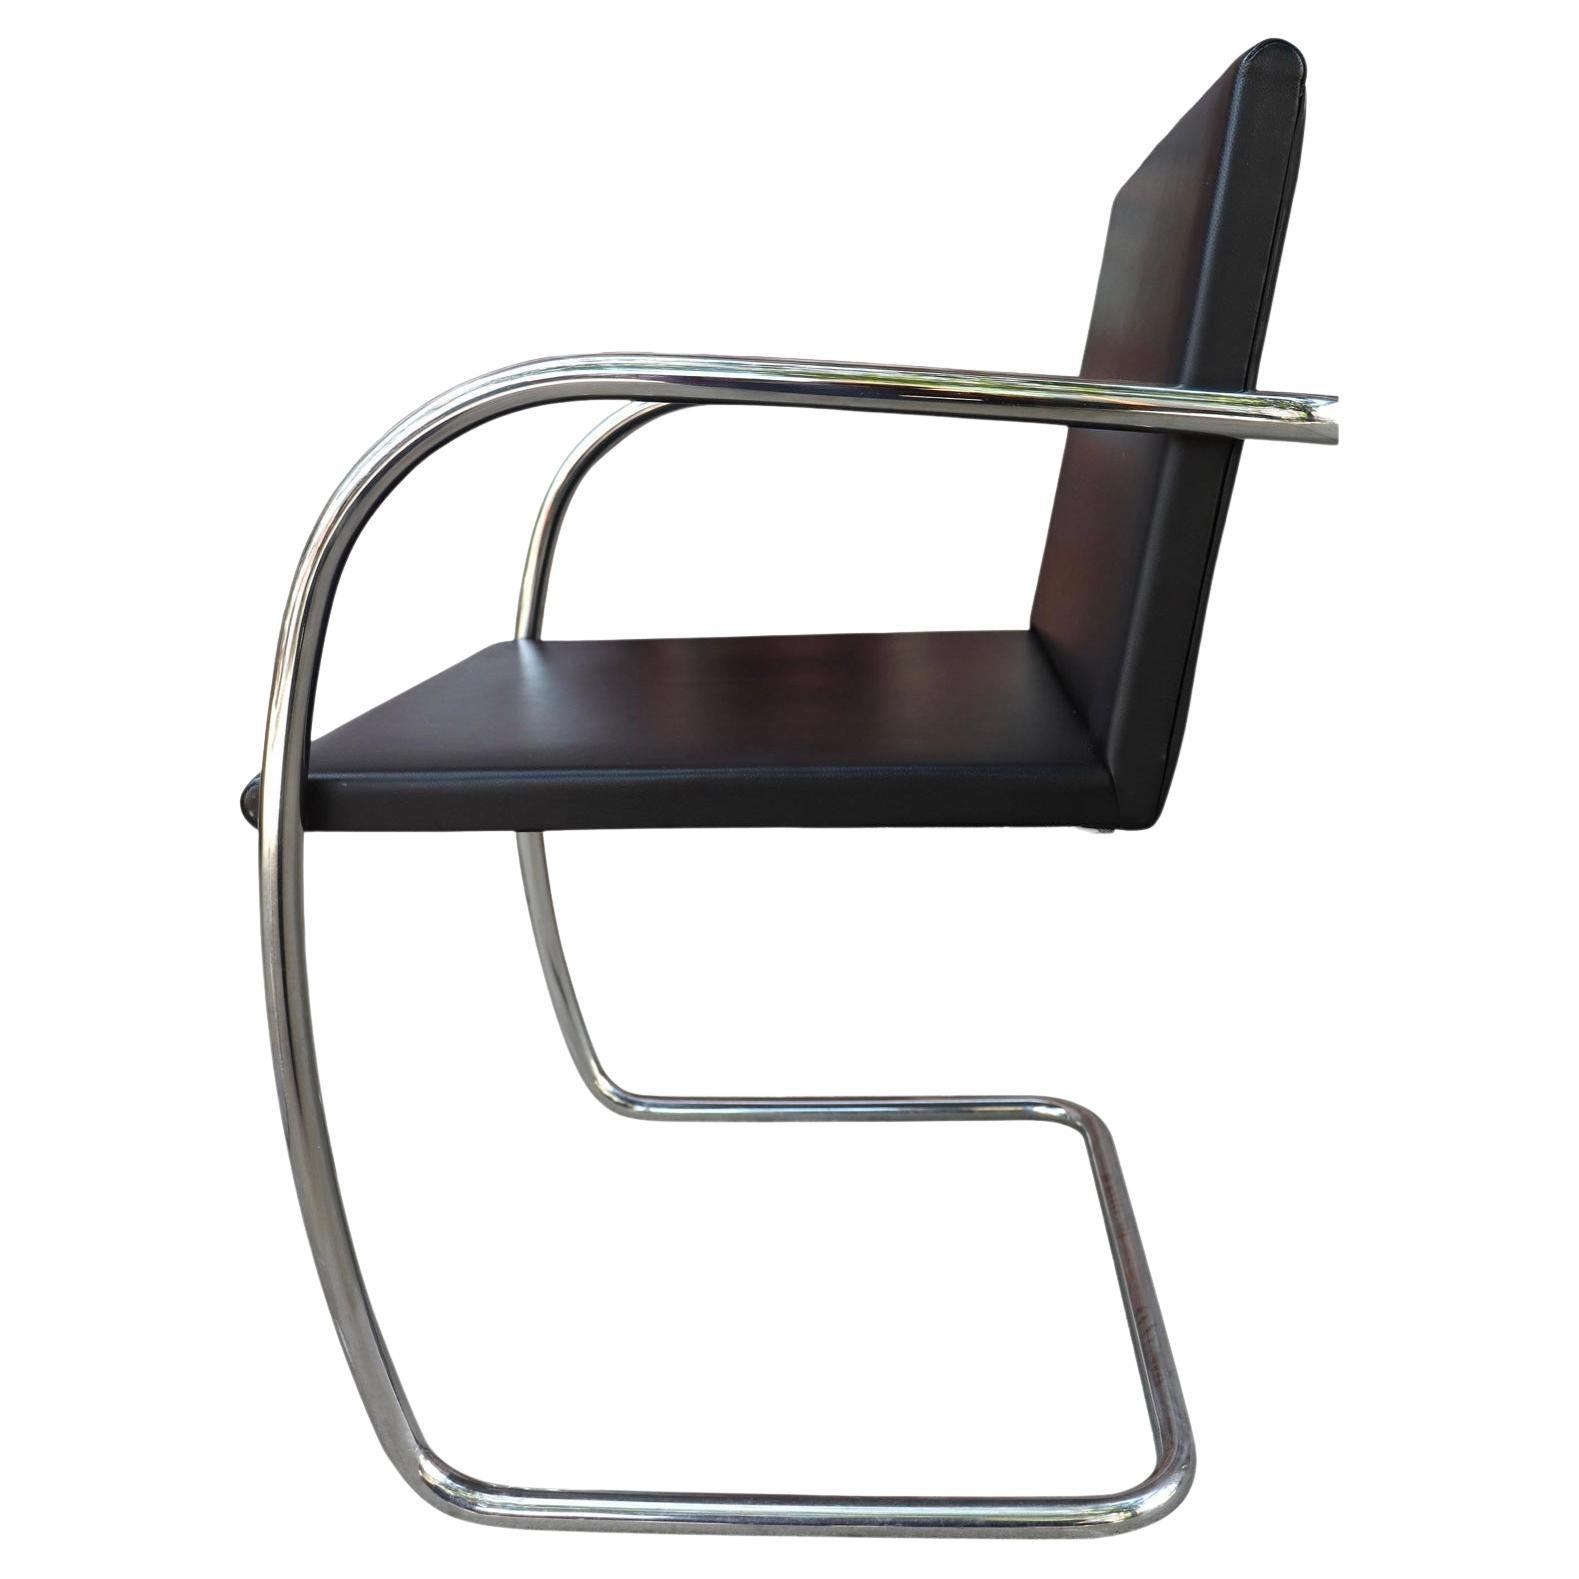 One black leather Brno chair with tubular frame and thin pad seat and back as was the original design.

Ludwig Mies van der Rohe by Knoll. Beautiful showing very little use.

Measures: arm height 27.5”.

350 shipping continental US